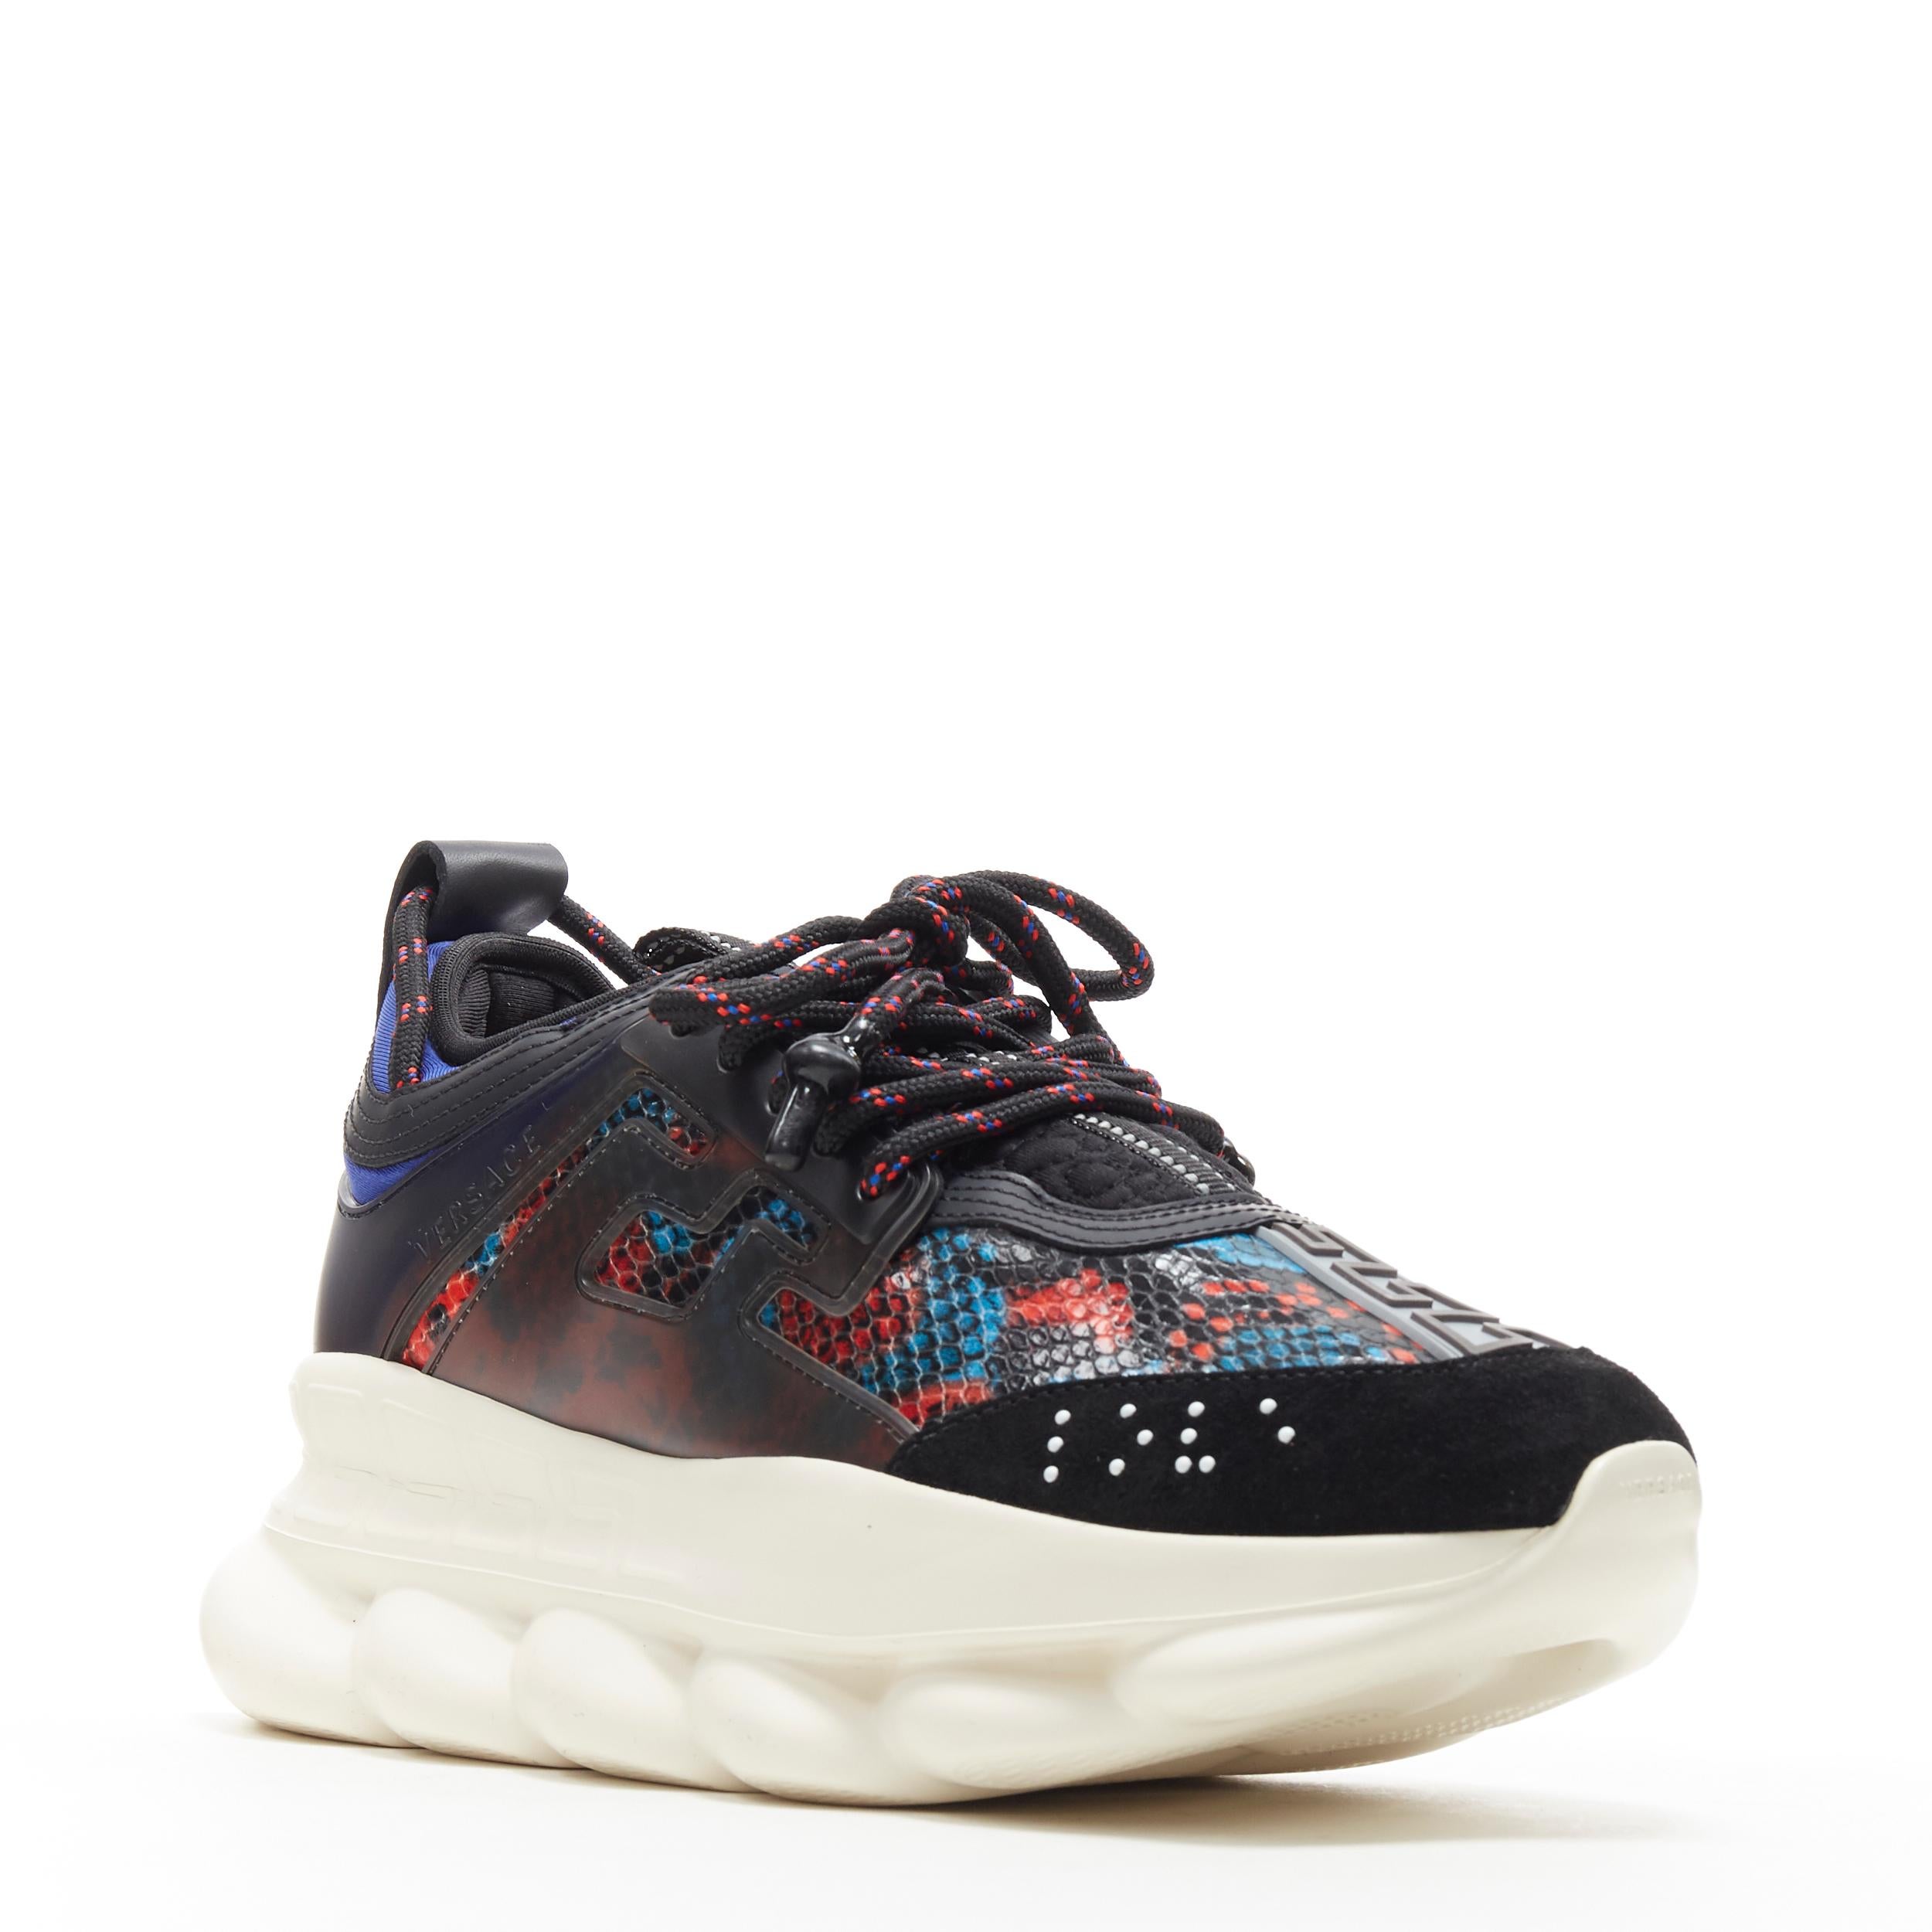 new VERSACE Chain Reaction Red Blue snake print low chunky dad sneaker EU37 US7 
Reference: TGAS/A06336 
Brand: Versace 
Designer: Salehe Bembury 
Model: Chain Reaction Blue Python 
Material: Leather 
Color: Blue 
Pattern: Snakeskin 
Closure: Lace